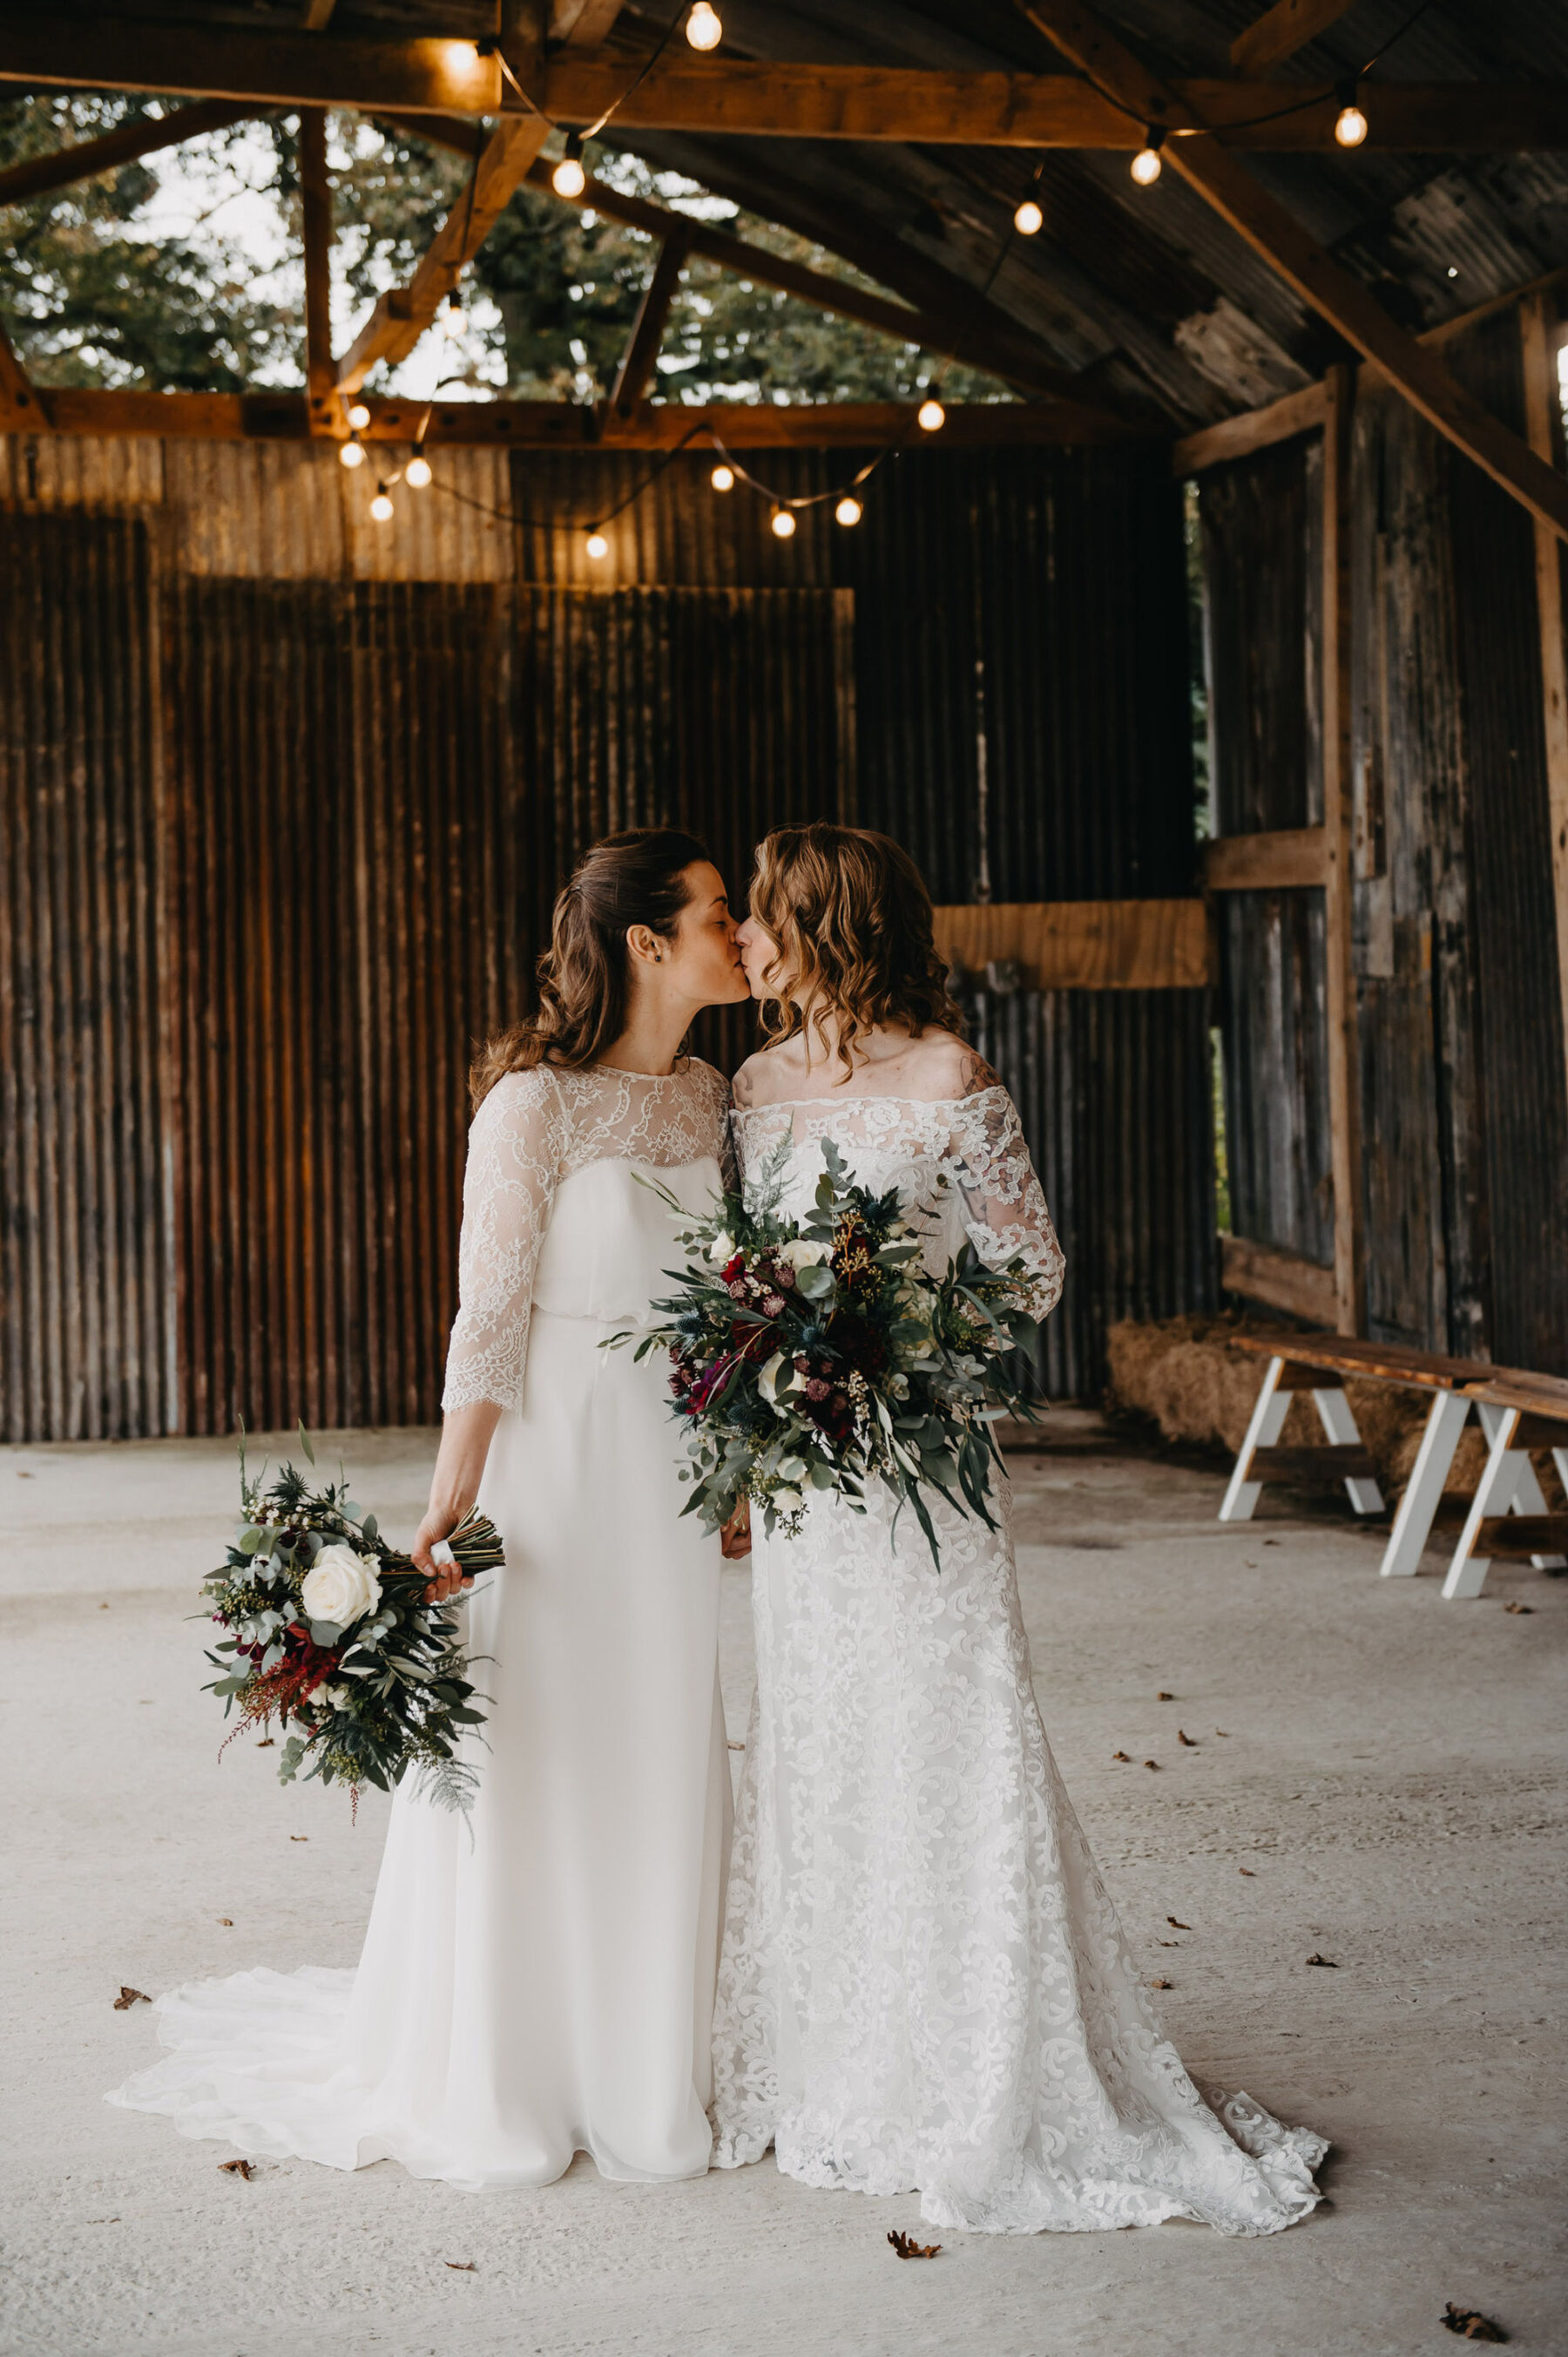 Two brides with large winter wedding bouquets at barn wedding. Jessica Grace Photography.